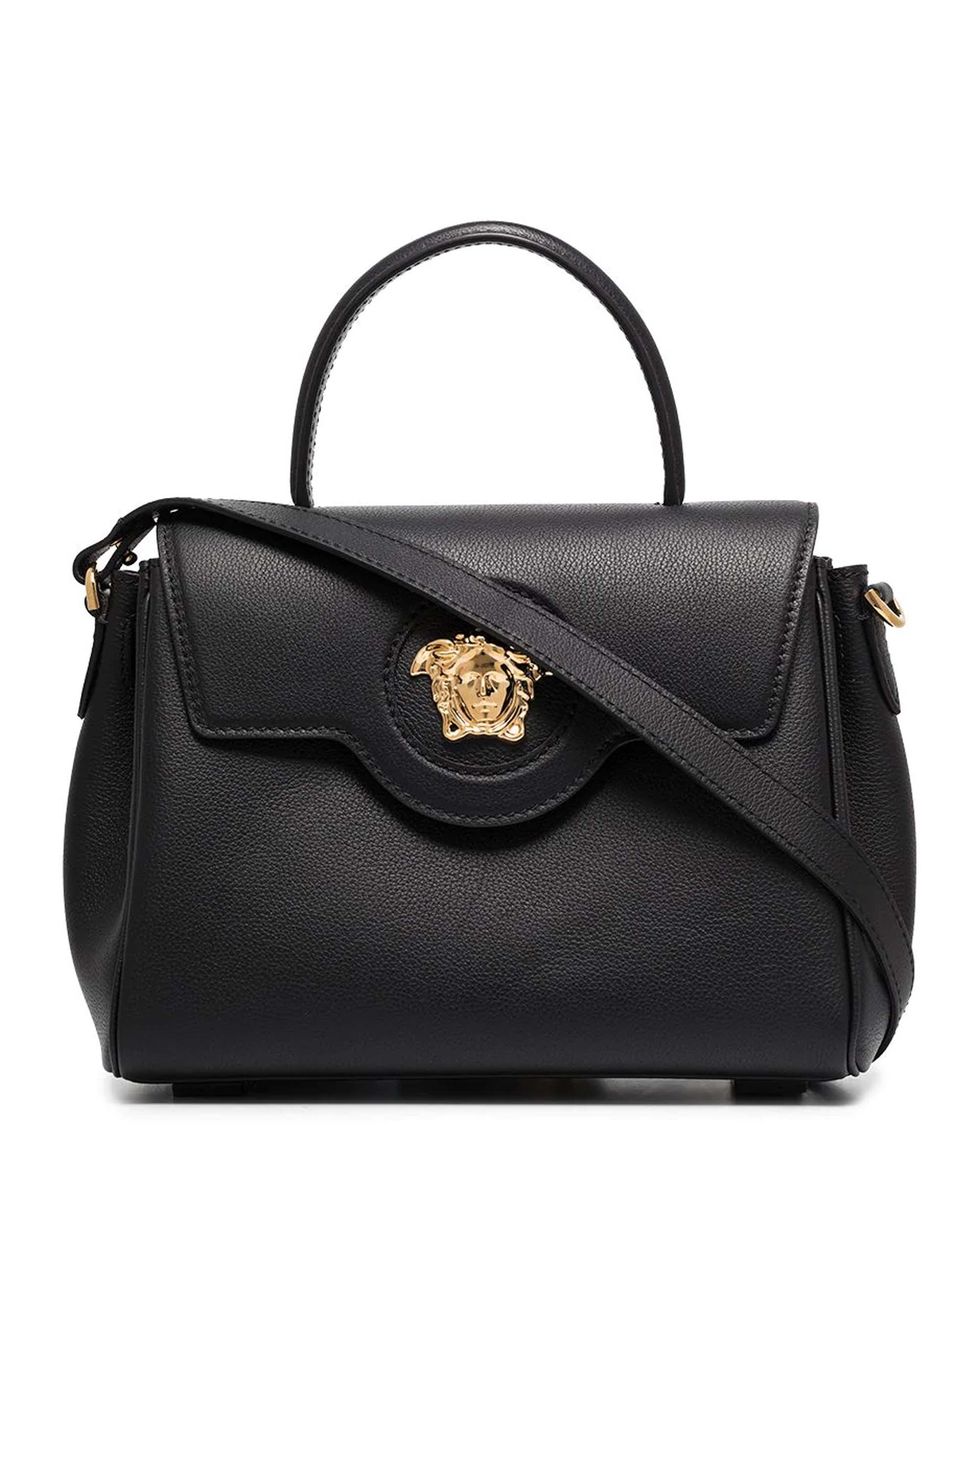 I Found 18 Excellent Designer Bags on Sale—You're Welcome